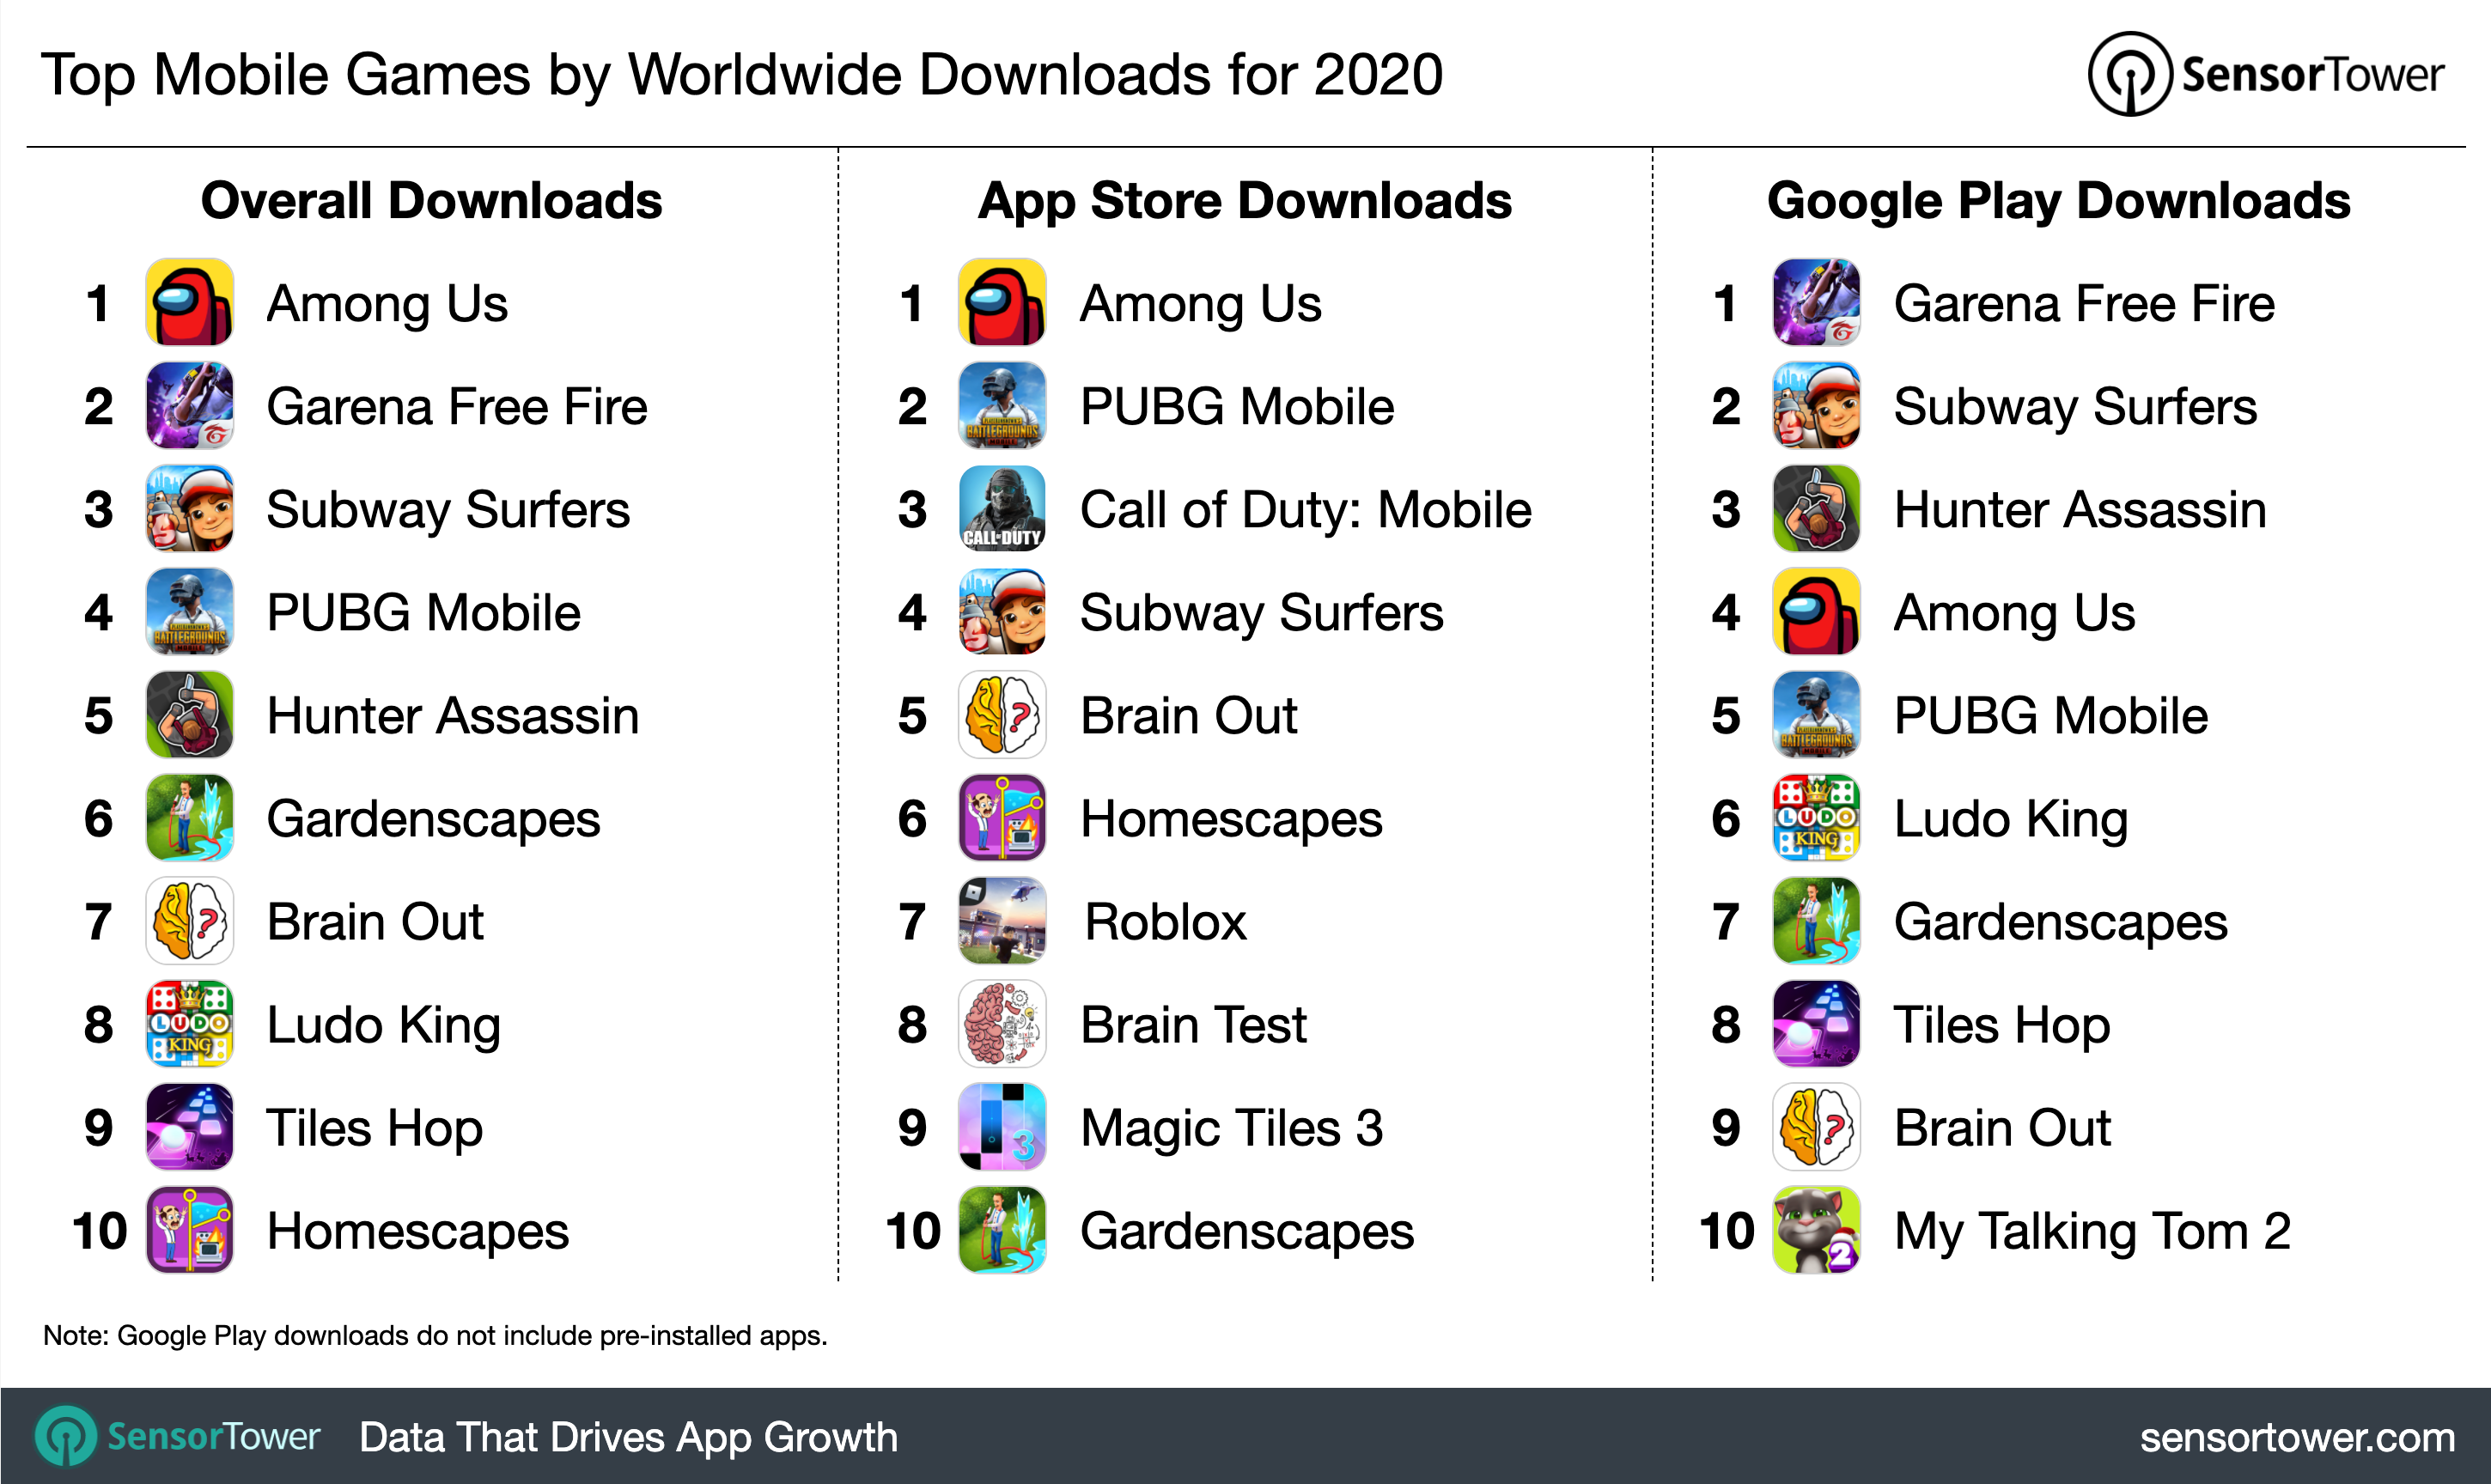 2020's top mobile games by downloads.